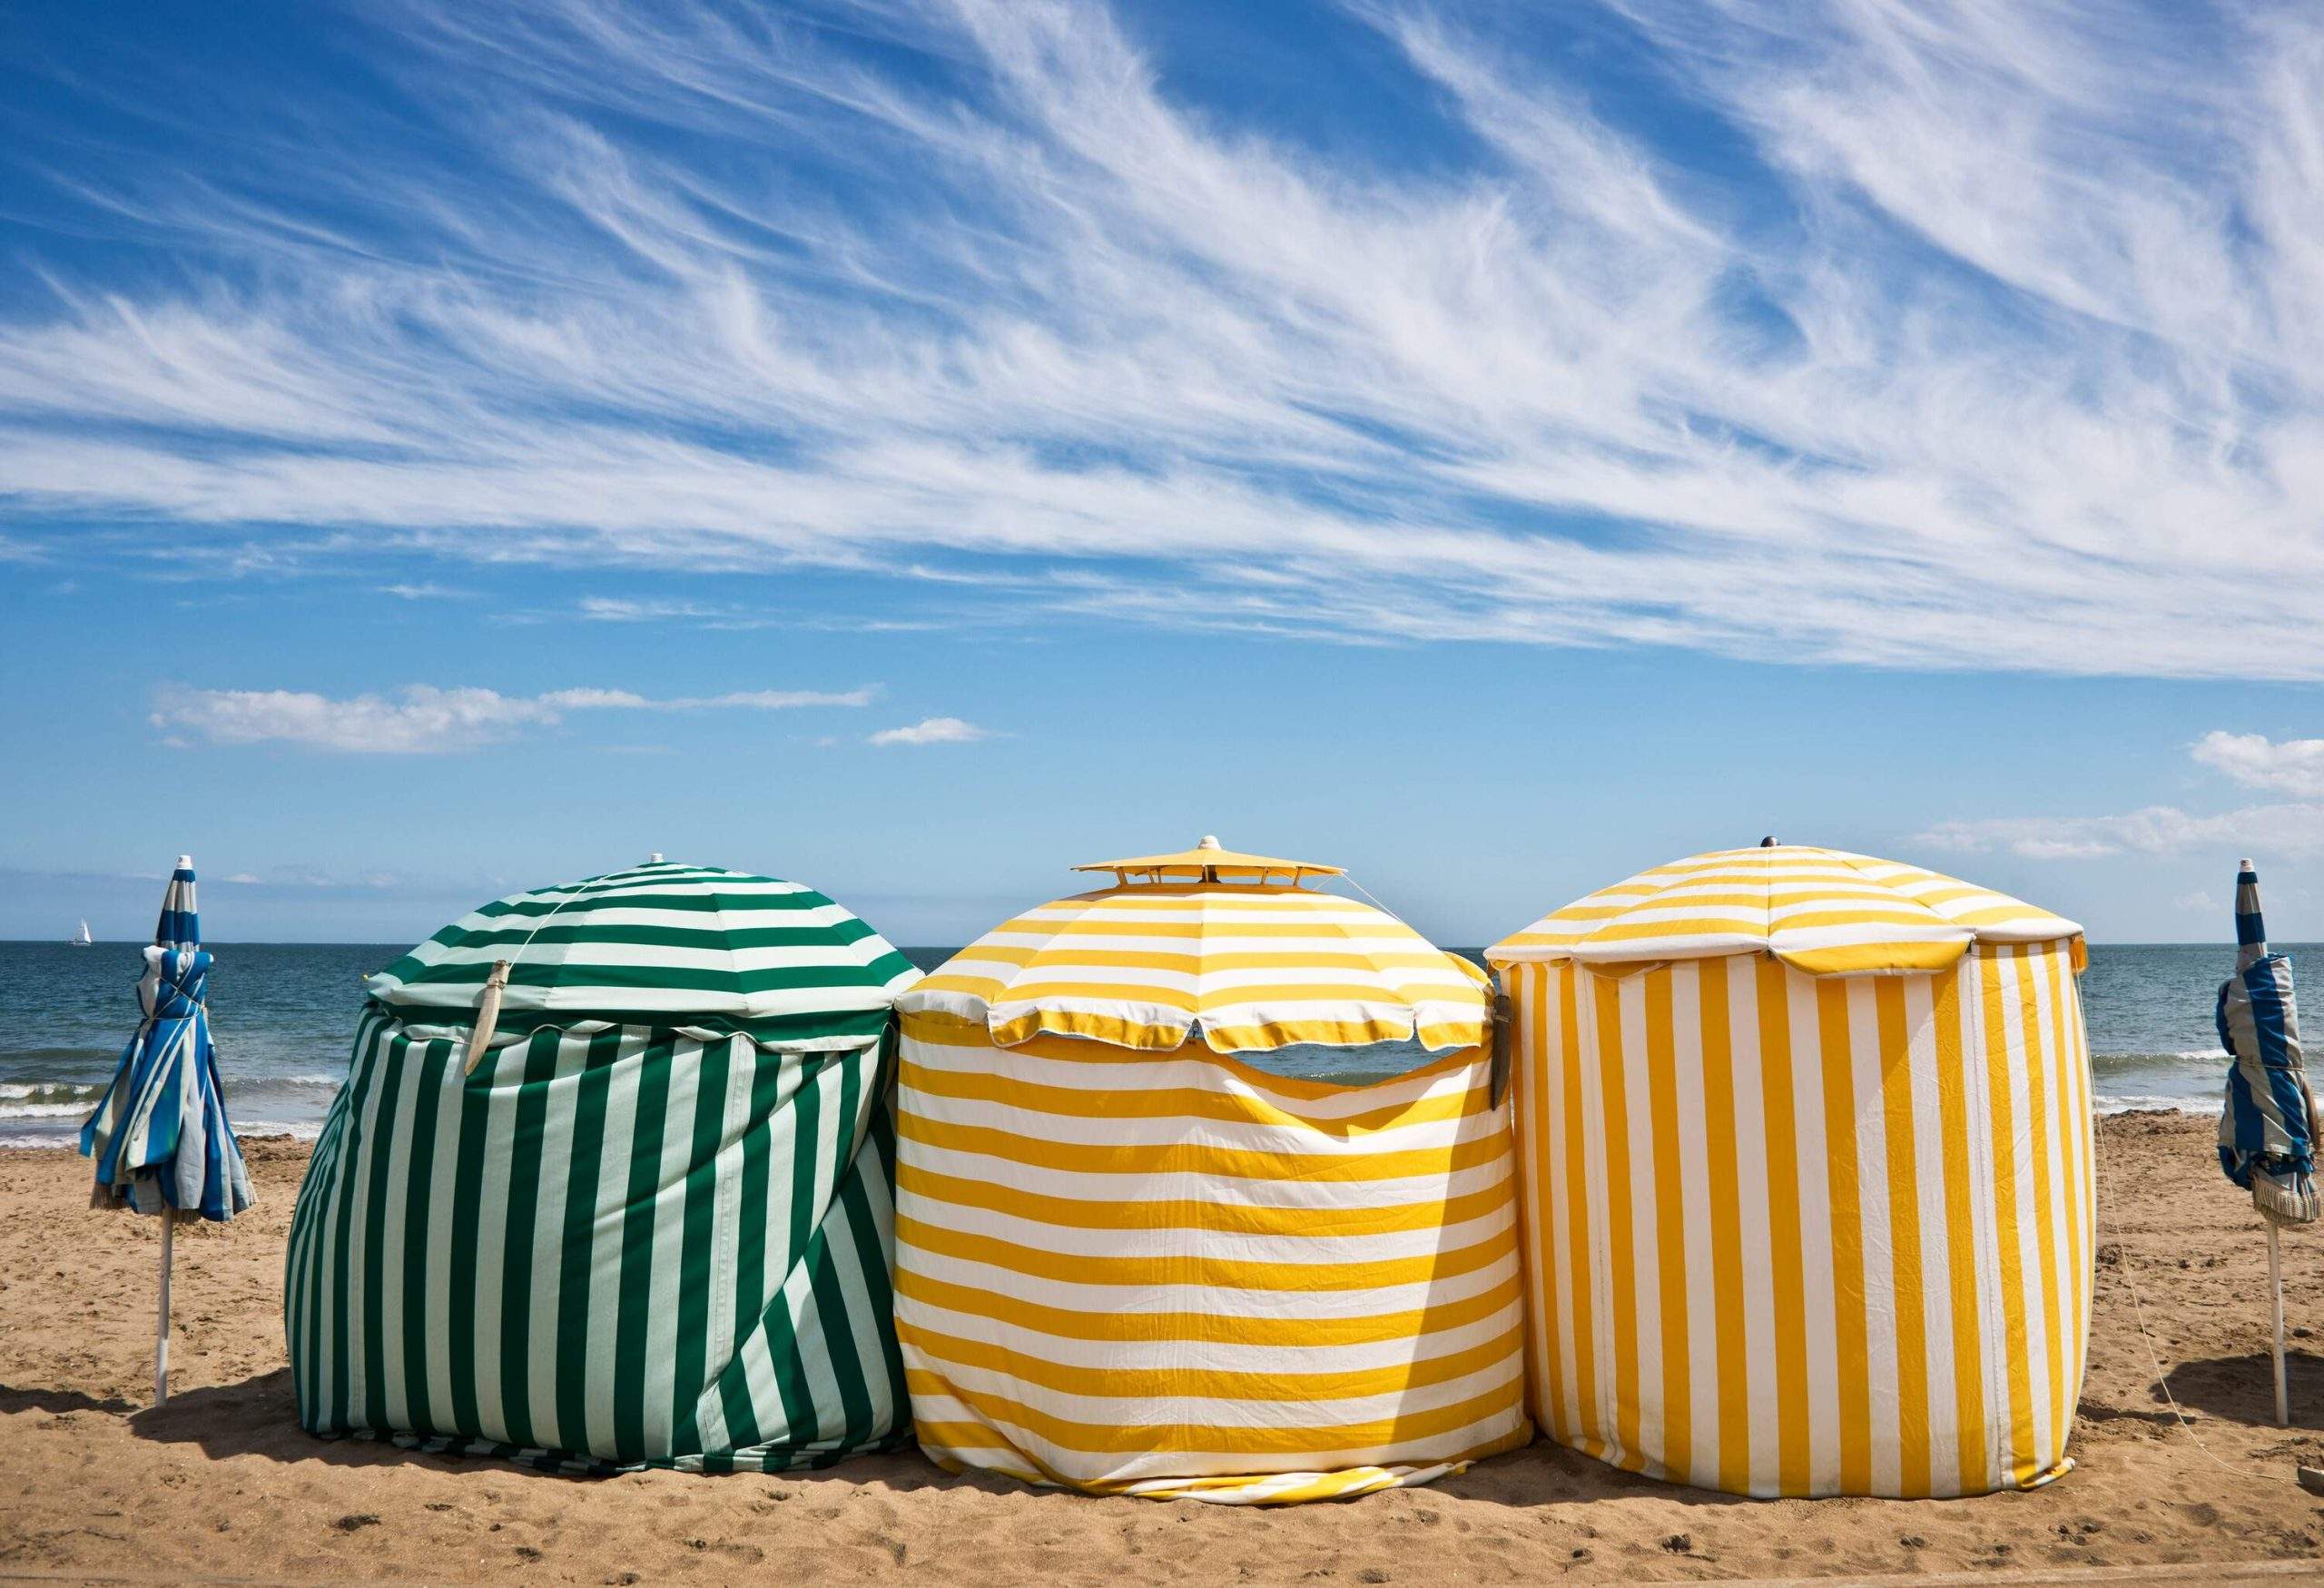 Colourful striped tents standing on golden sand along the shore.